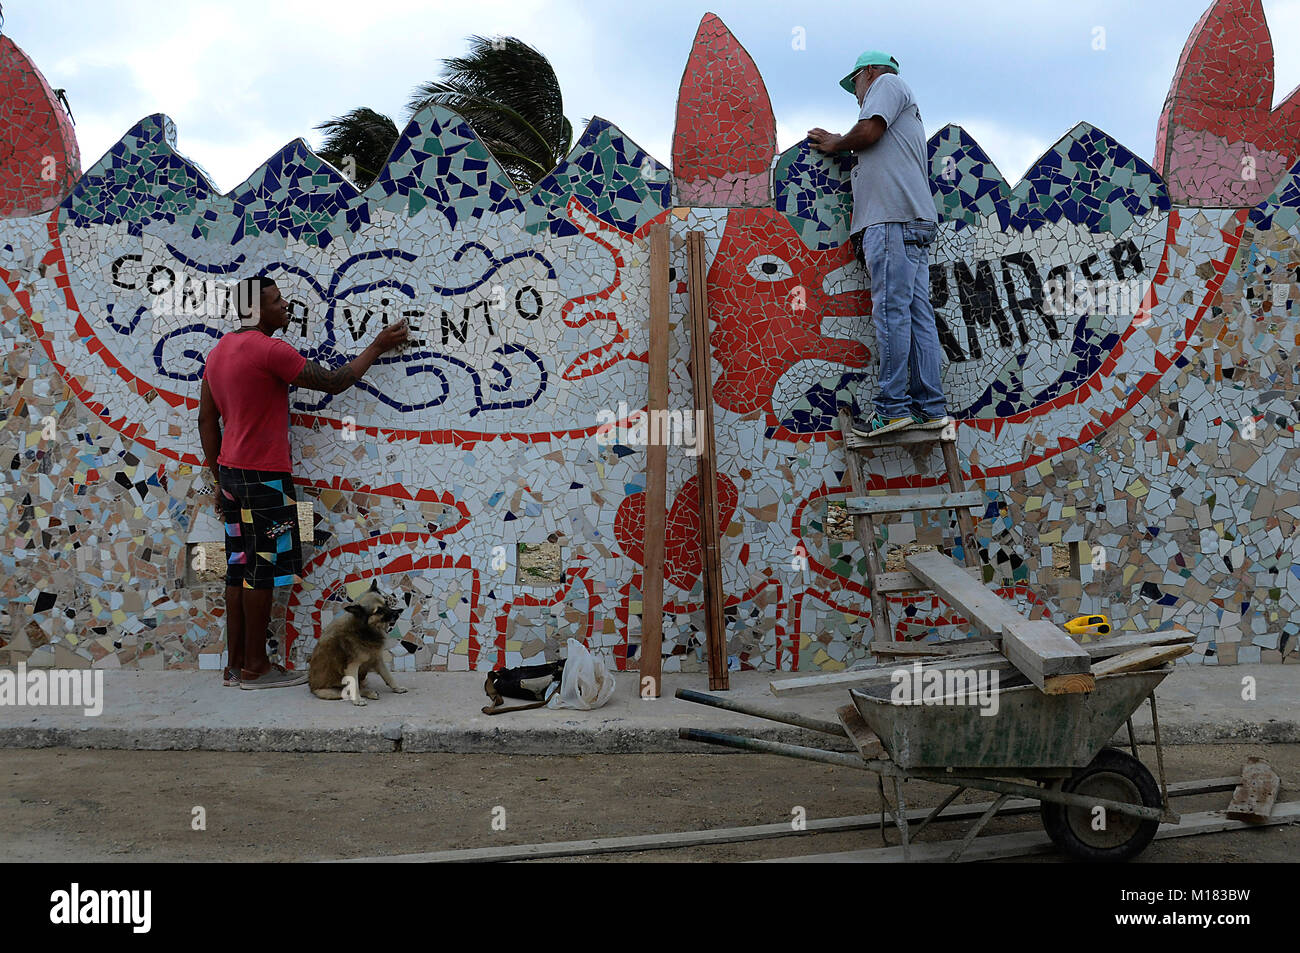 (180129) -- HAVANA, Jan. 29, 2018 (Xinhua) -- Workers clean a facade benefited by the community cultural project 'The Joy of Living' headed by the Cuban painter and sculptor Jose Antonio Rodriguez Fuster, in Jaimanitas of Havana, Cuba, on Jan. 25, 2018. Fusterland, a humble neighborhood to the west of Havana transformed from a remote fishing village, has become a hot tourist attraction in recent years thanks to the transformation, and the key to the fundamental change is, to the shock of many, art. Jaimanitas, or what many people call 'Fusterland,' owns its unusual popularity to Cuban painter  Stock Photo